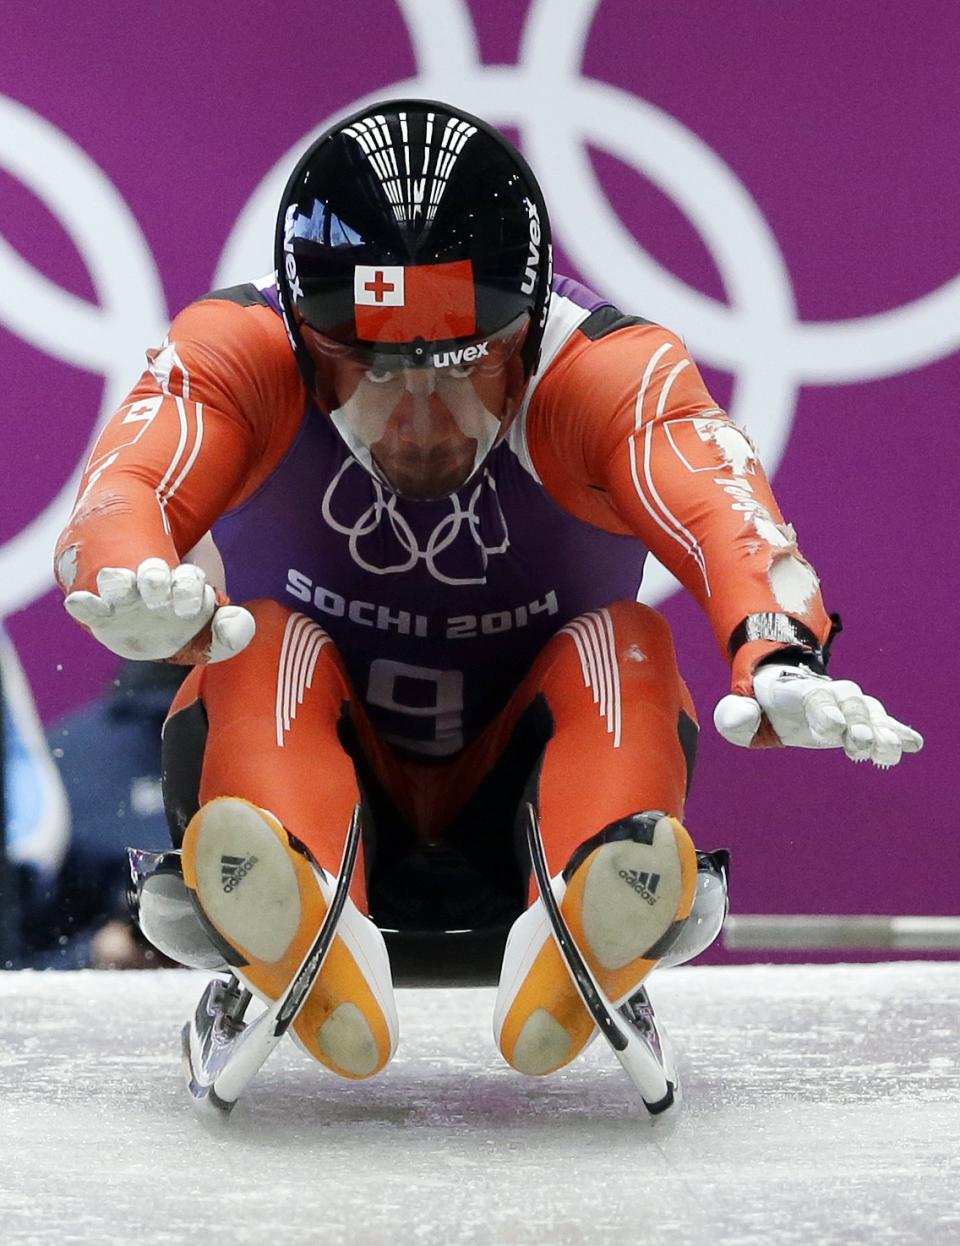 Bruno Banani of Tonga starts a run during a training session for the men's singles luge at the 2014 Winter Olympics, Thursday, Feb. 6, 2014, in Krasnaya Polyana, Russia. (AP Photo/Dita Alangkara)